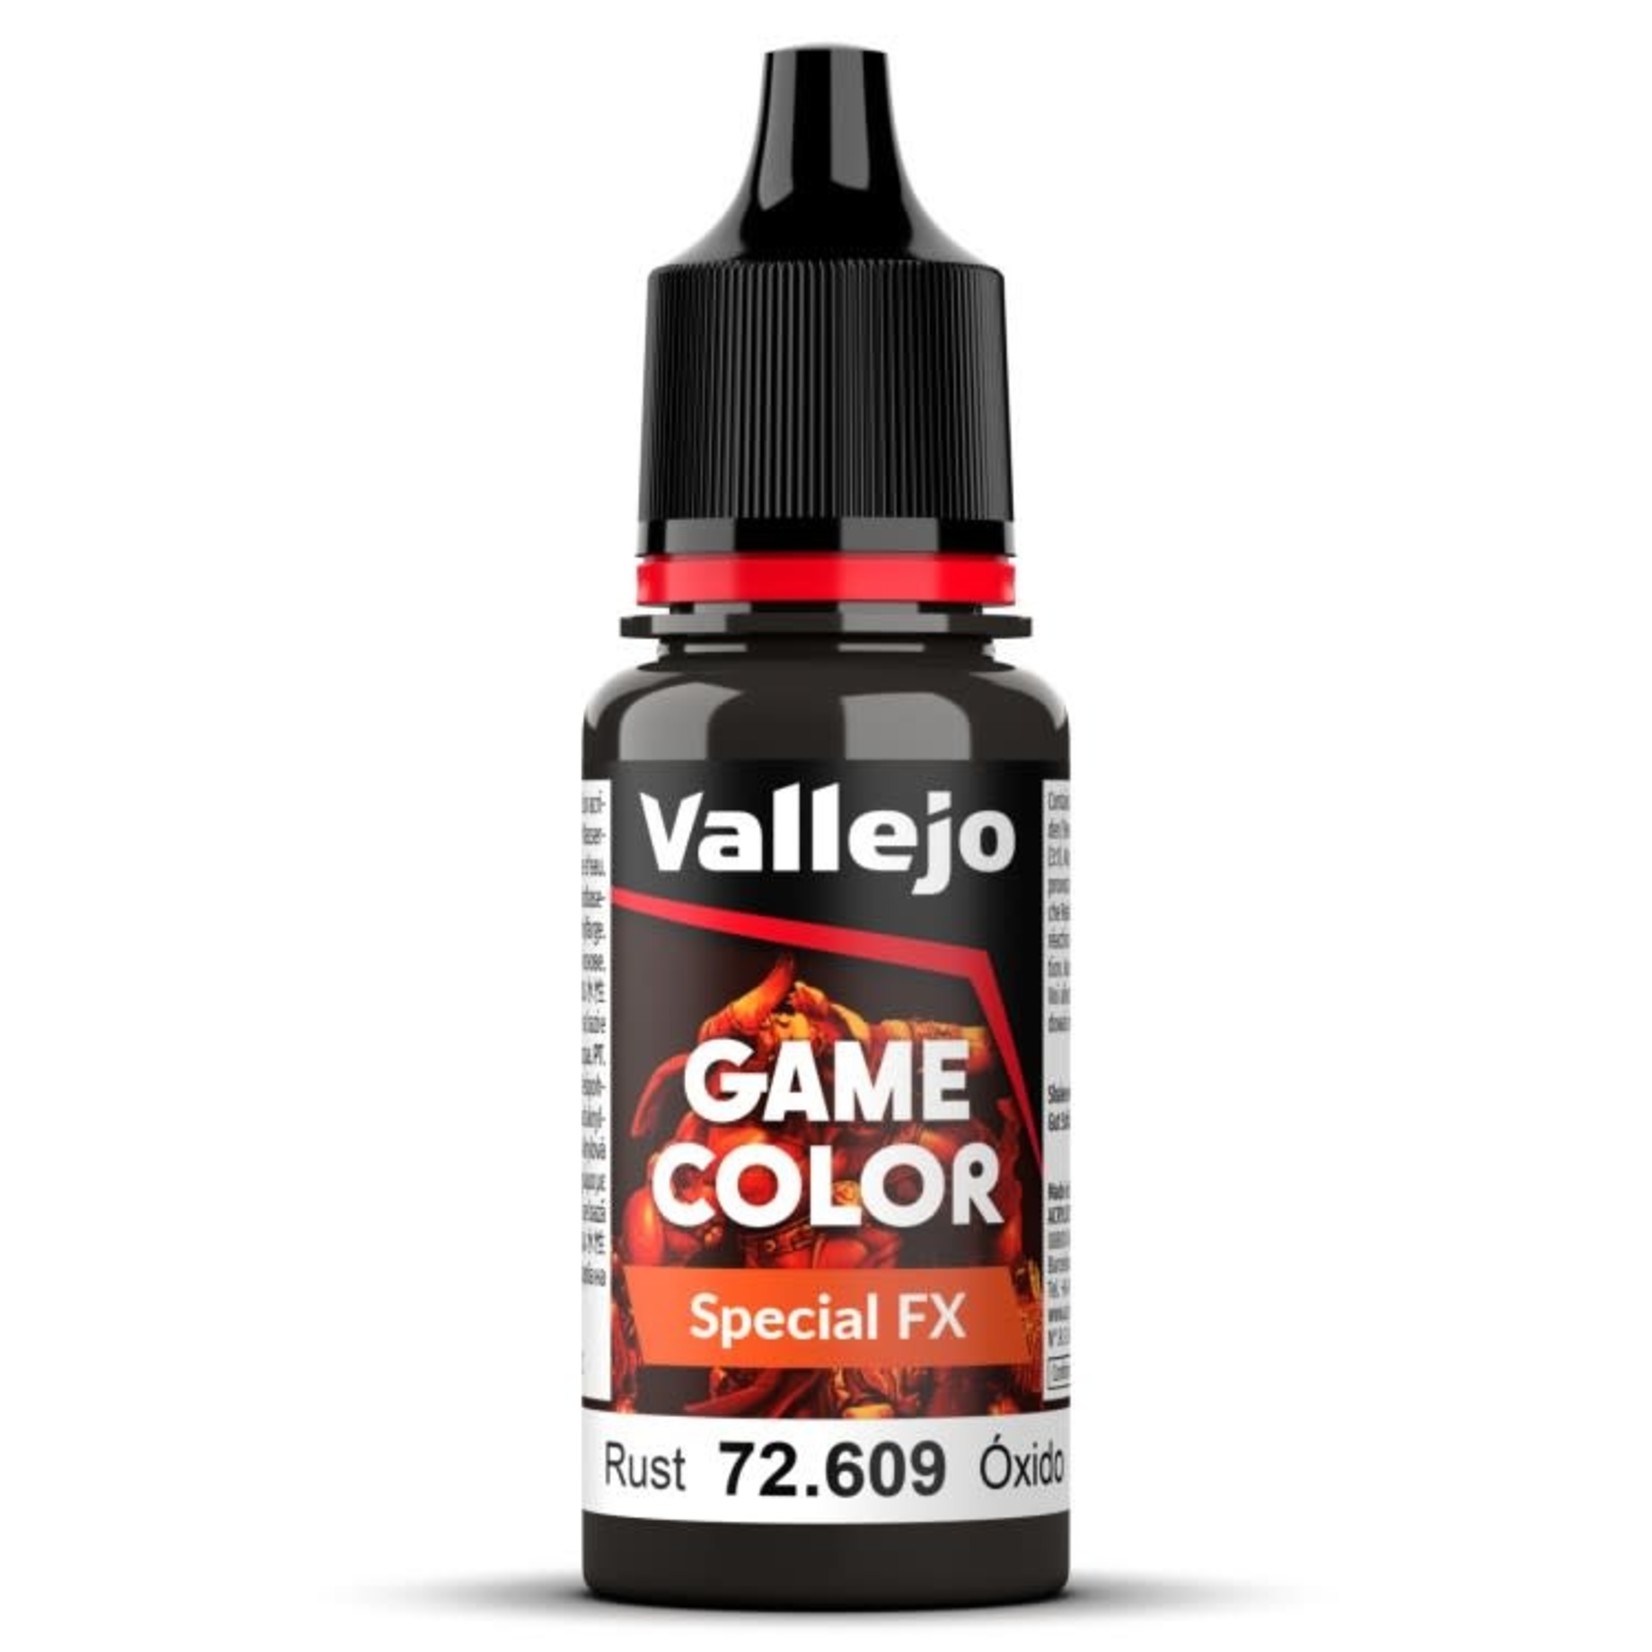 Vallejo Paint: Game Color, Special FX (Rust)